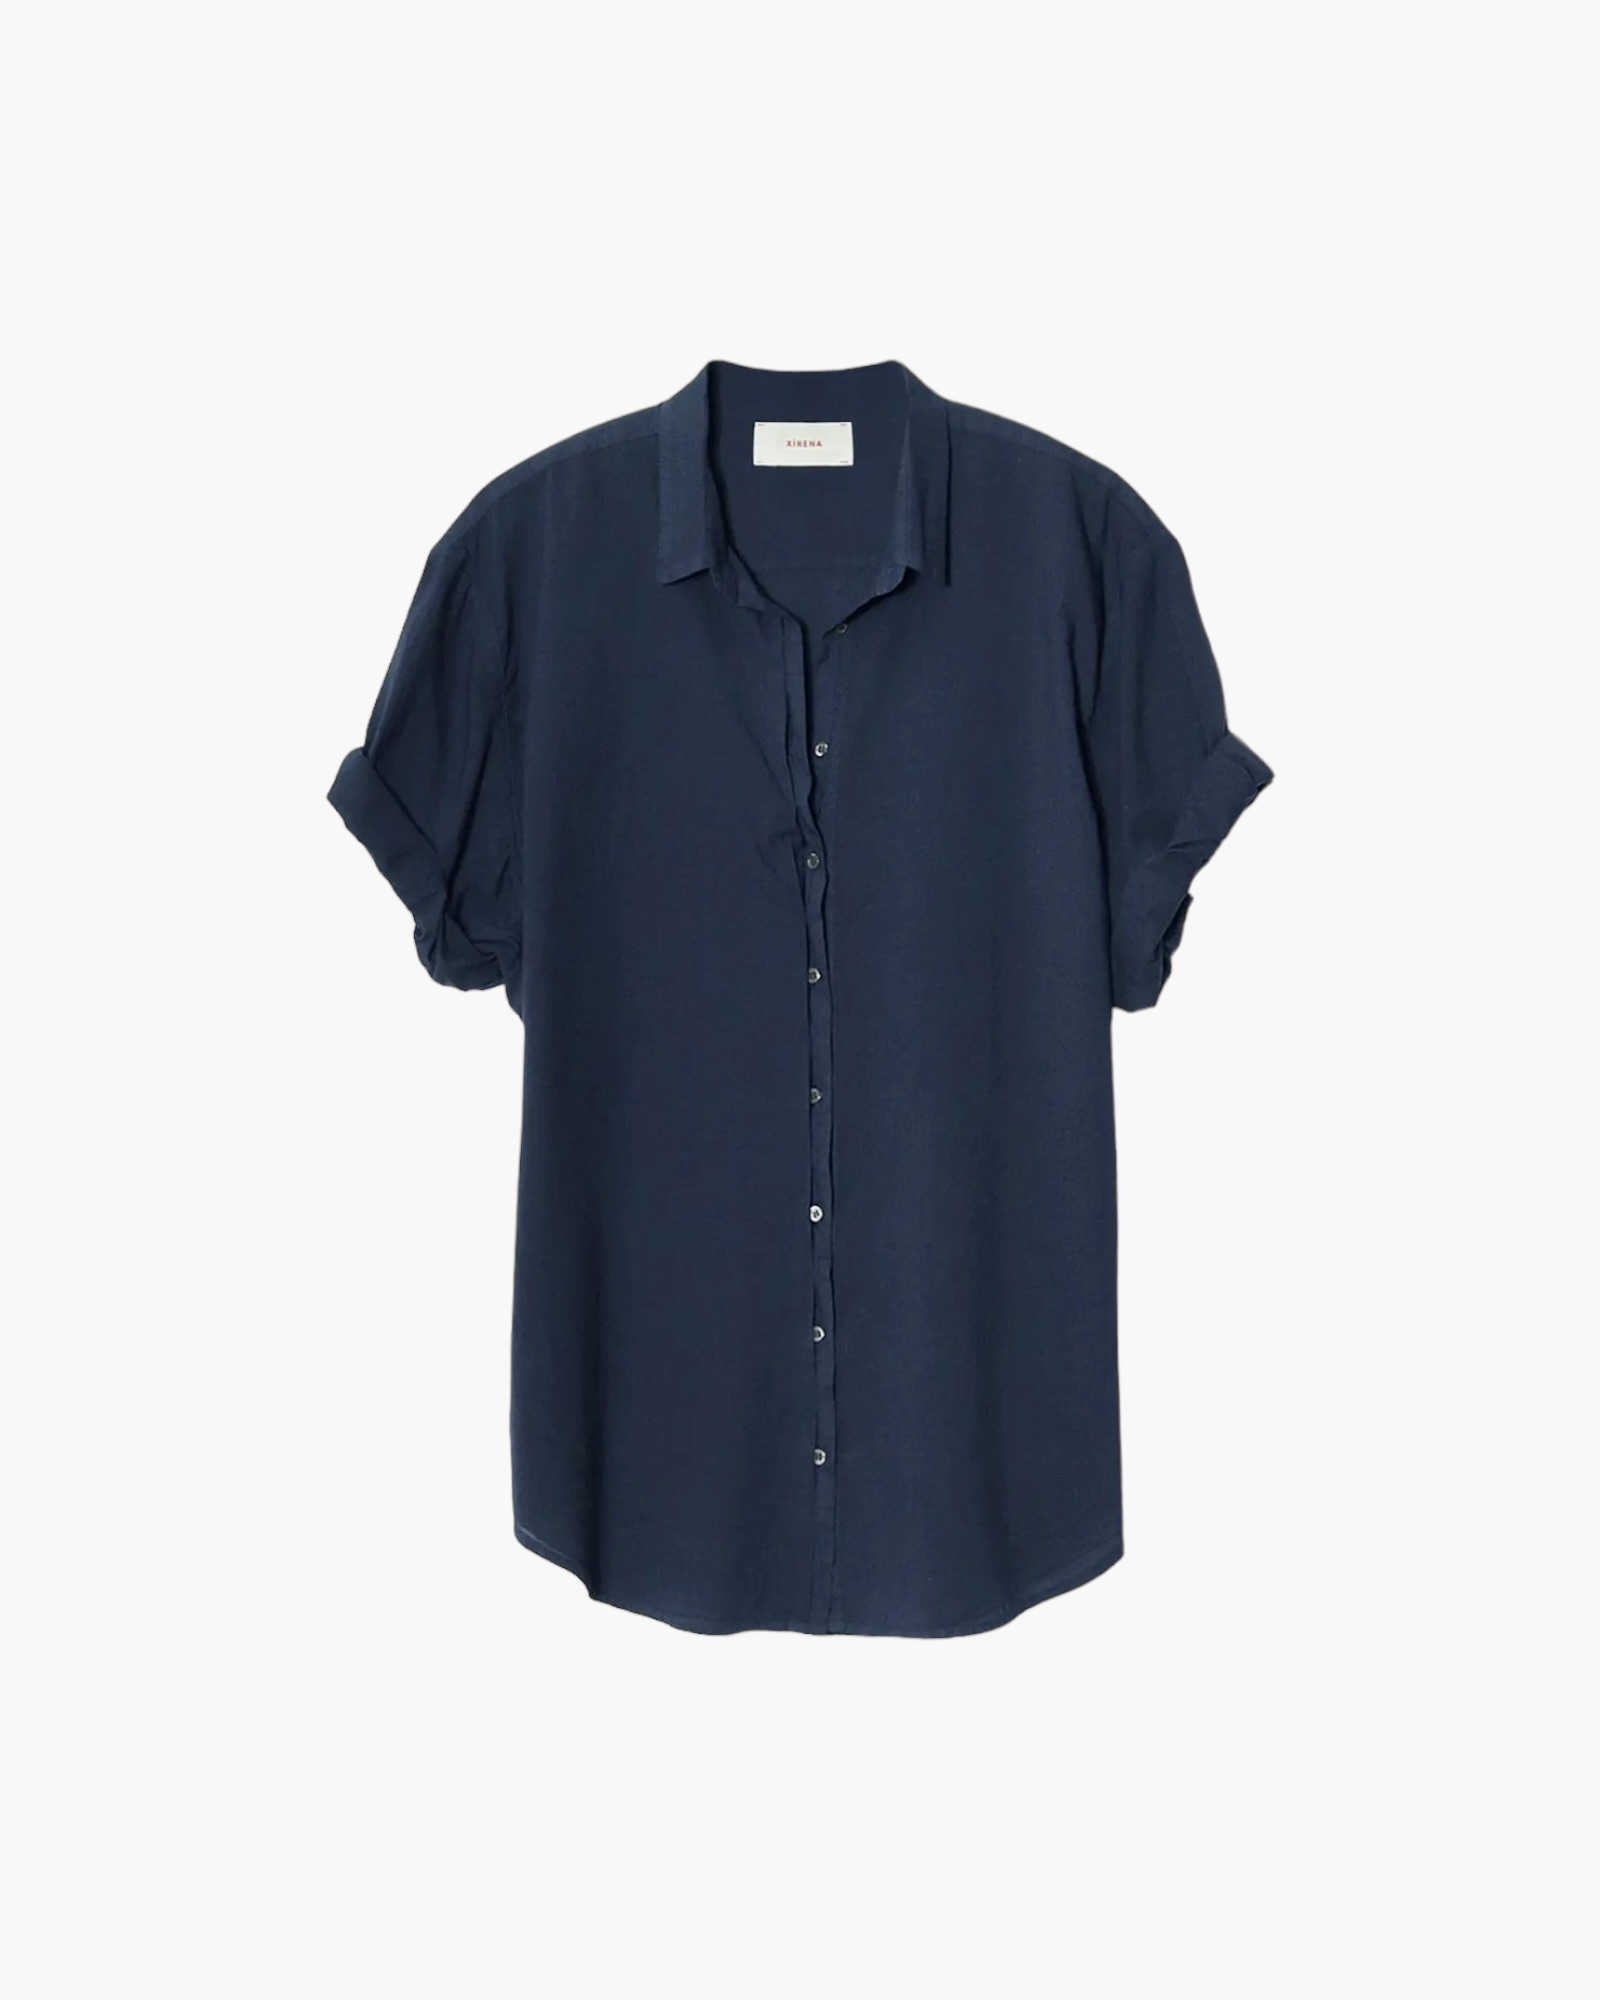 Bluse Channing navy XIRENA, Channing, navy, Xirena